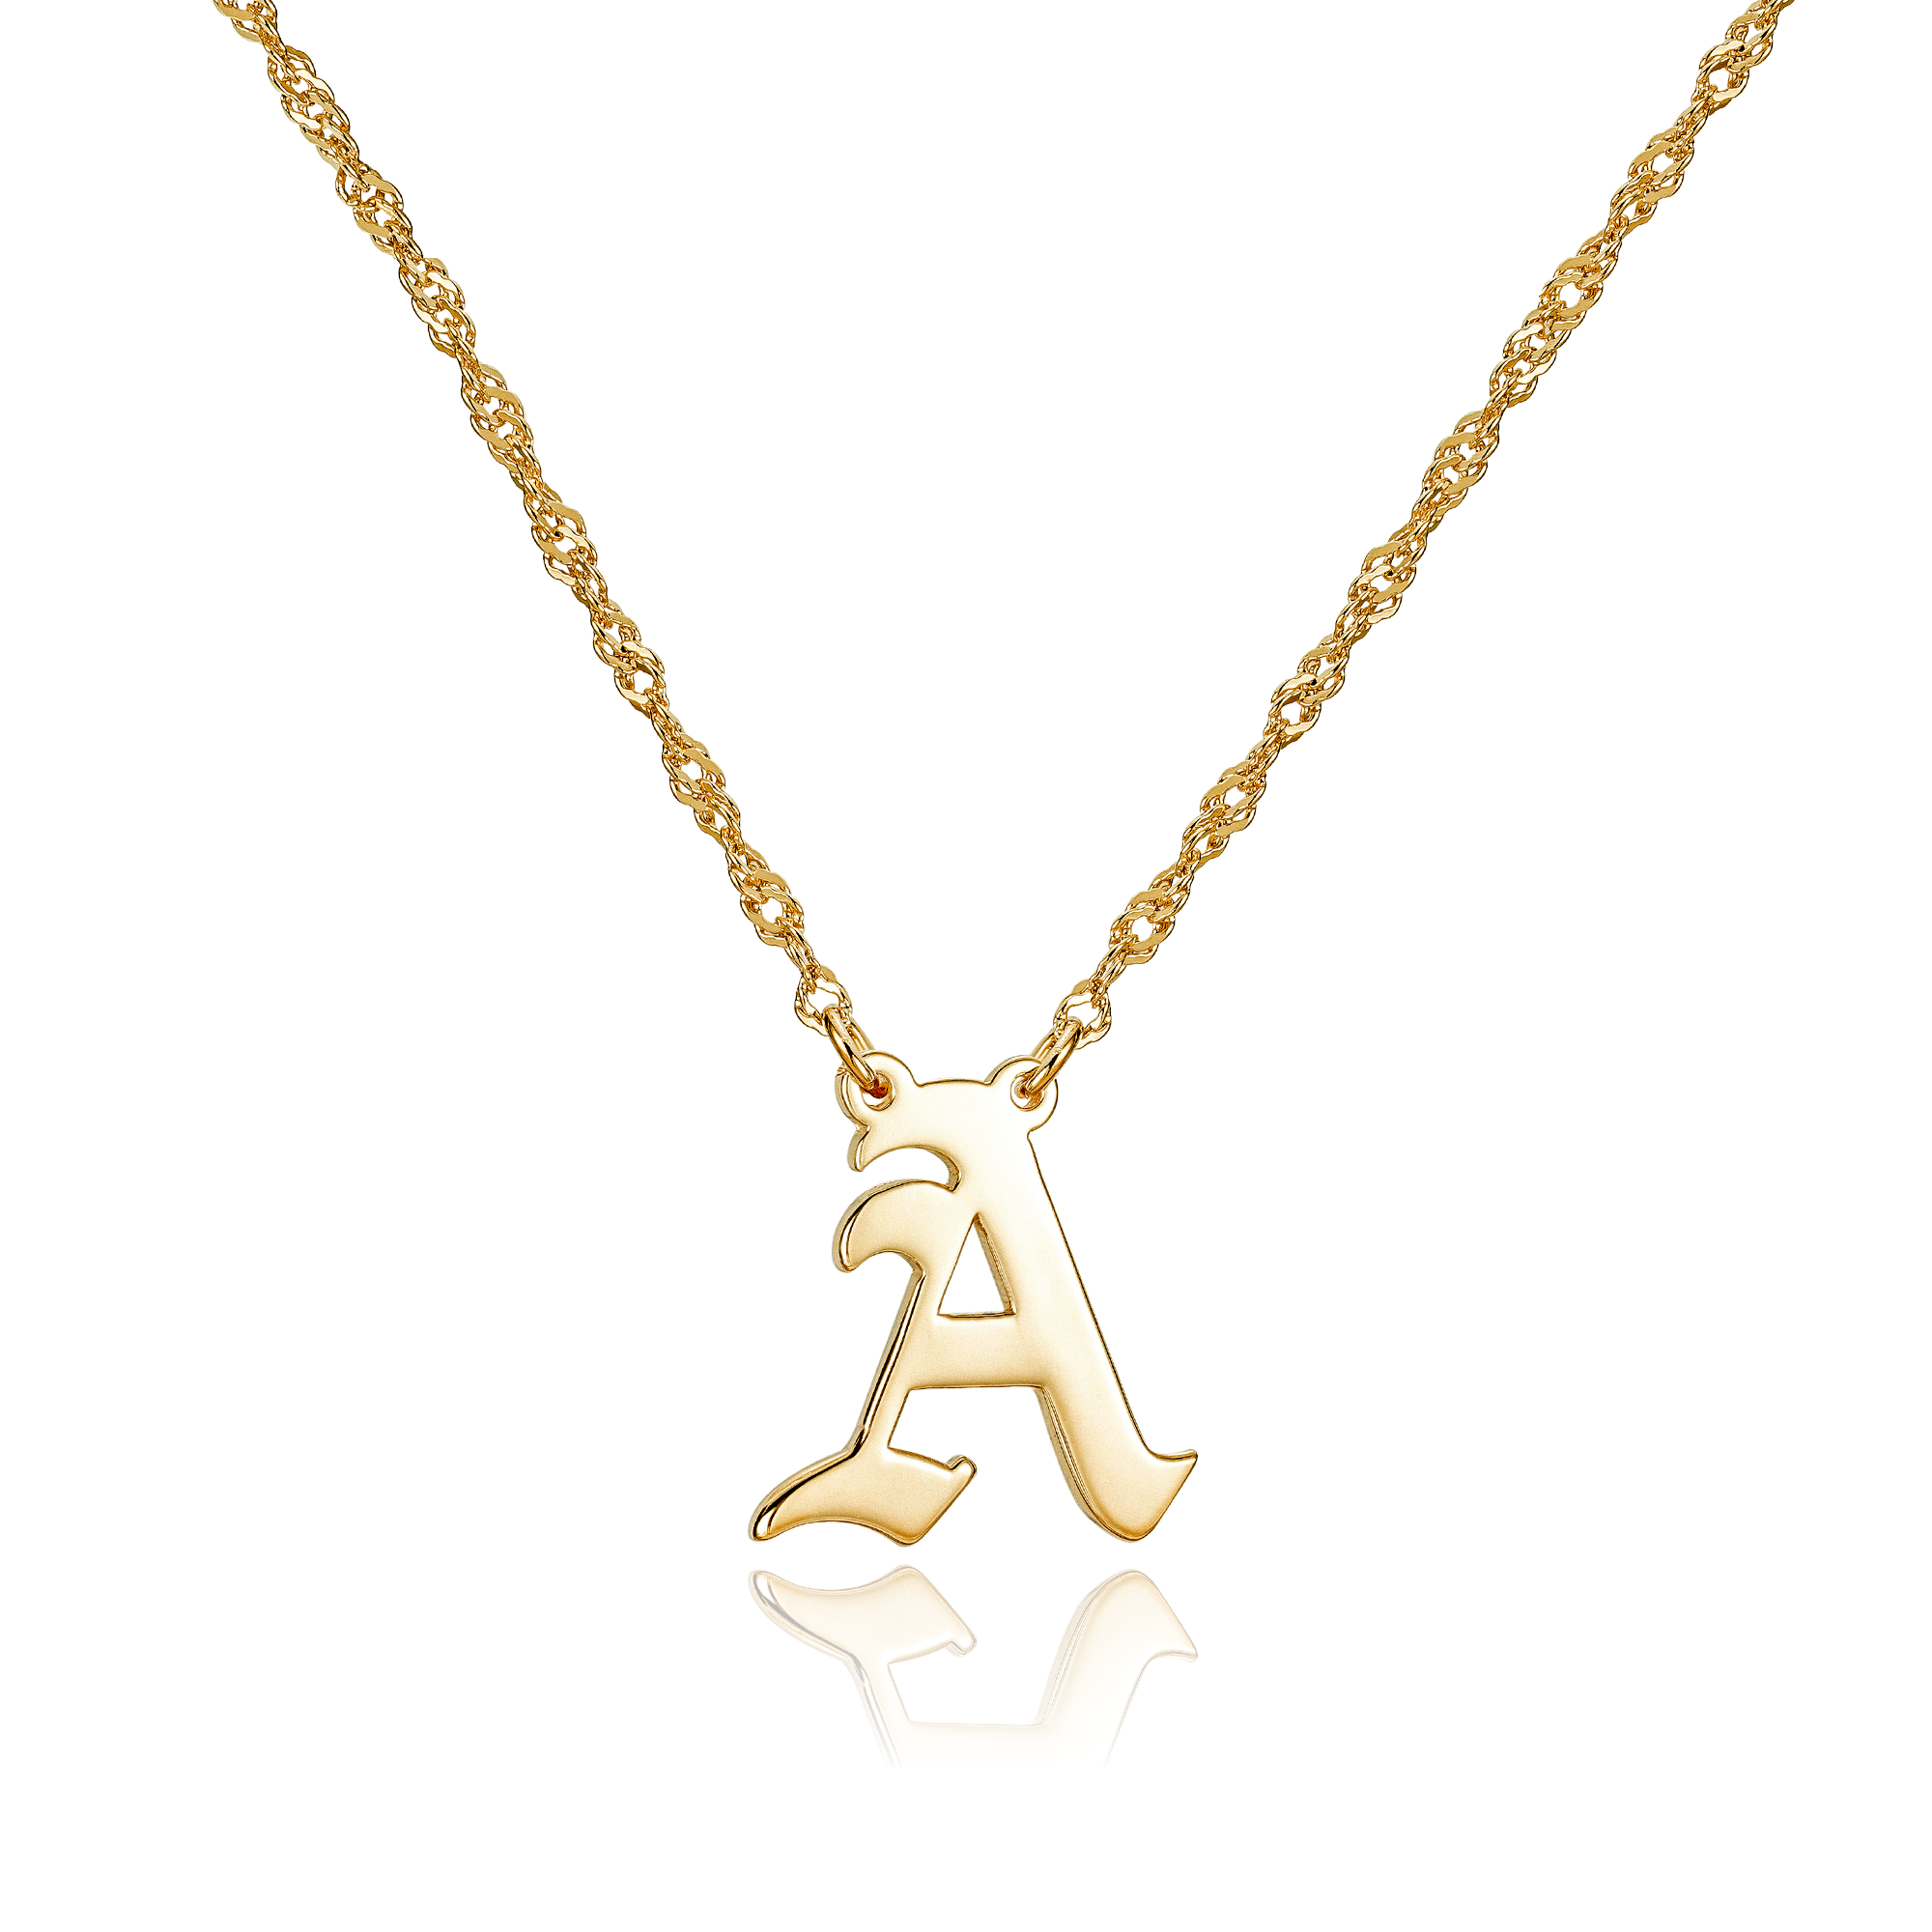 Personalized Script Initial N Lovers Padlock Pendant Necklace